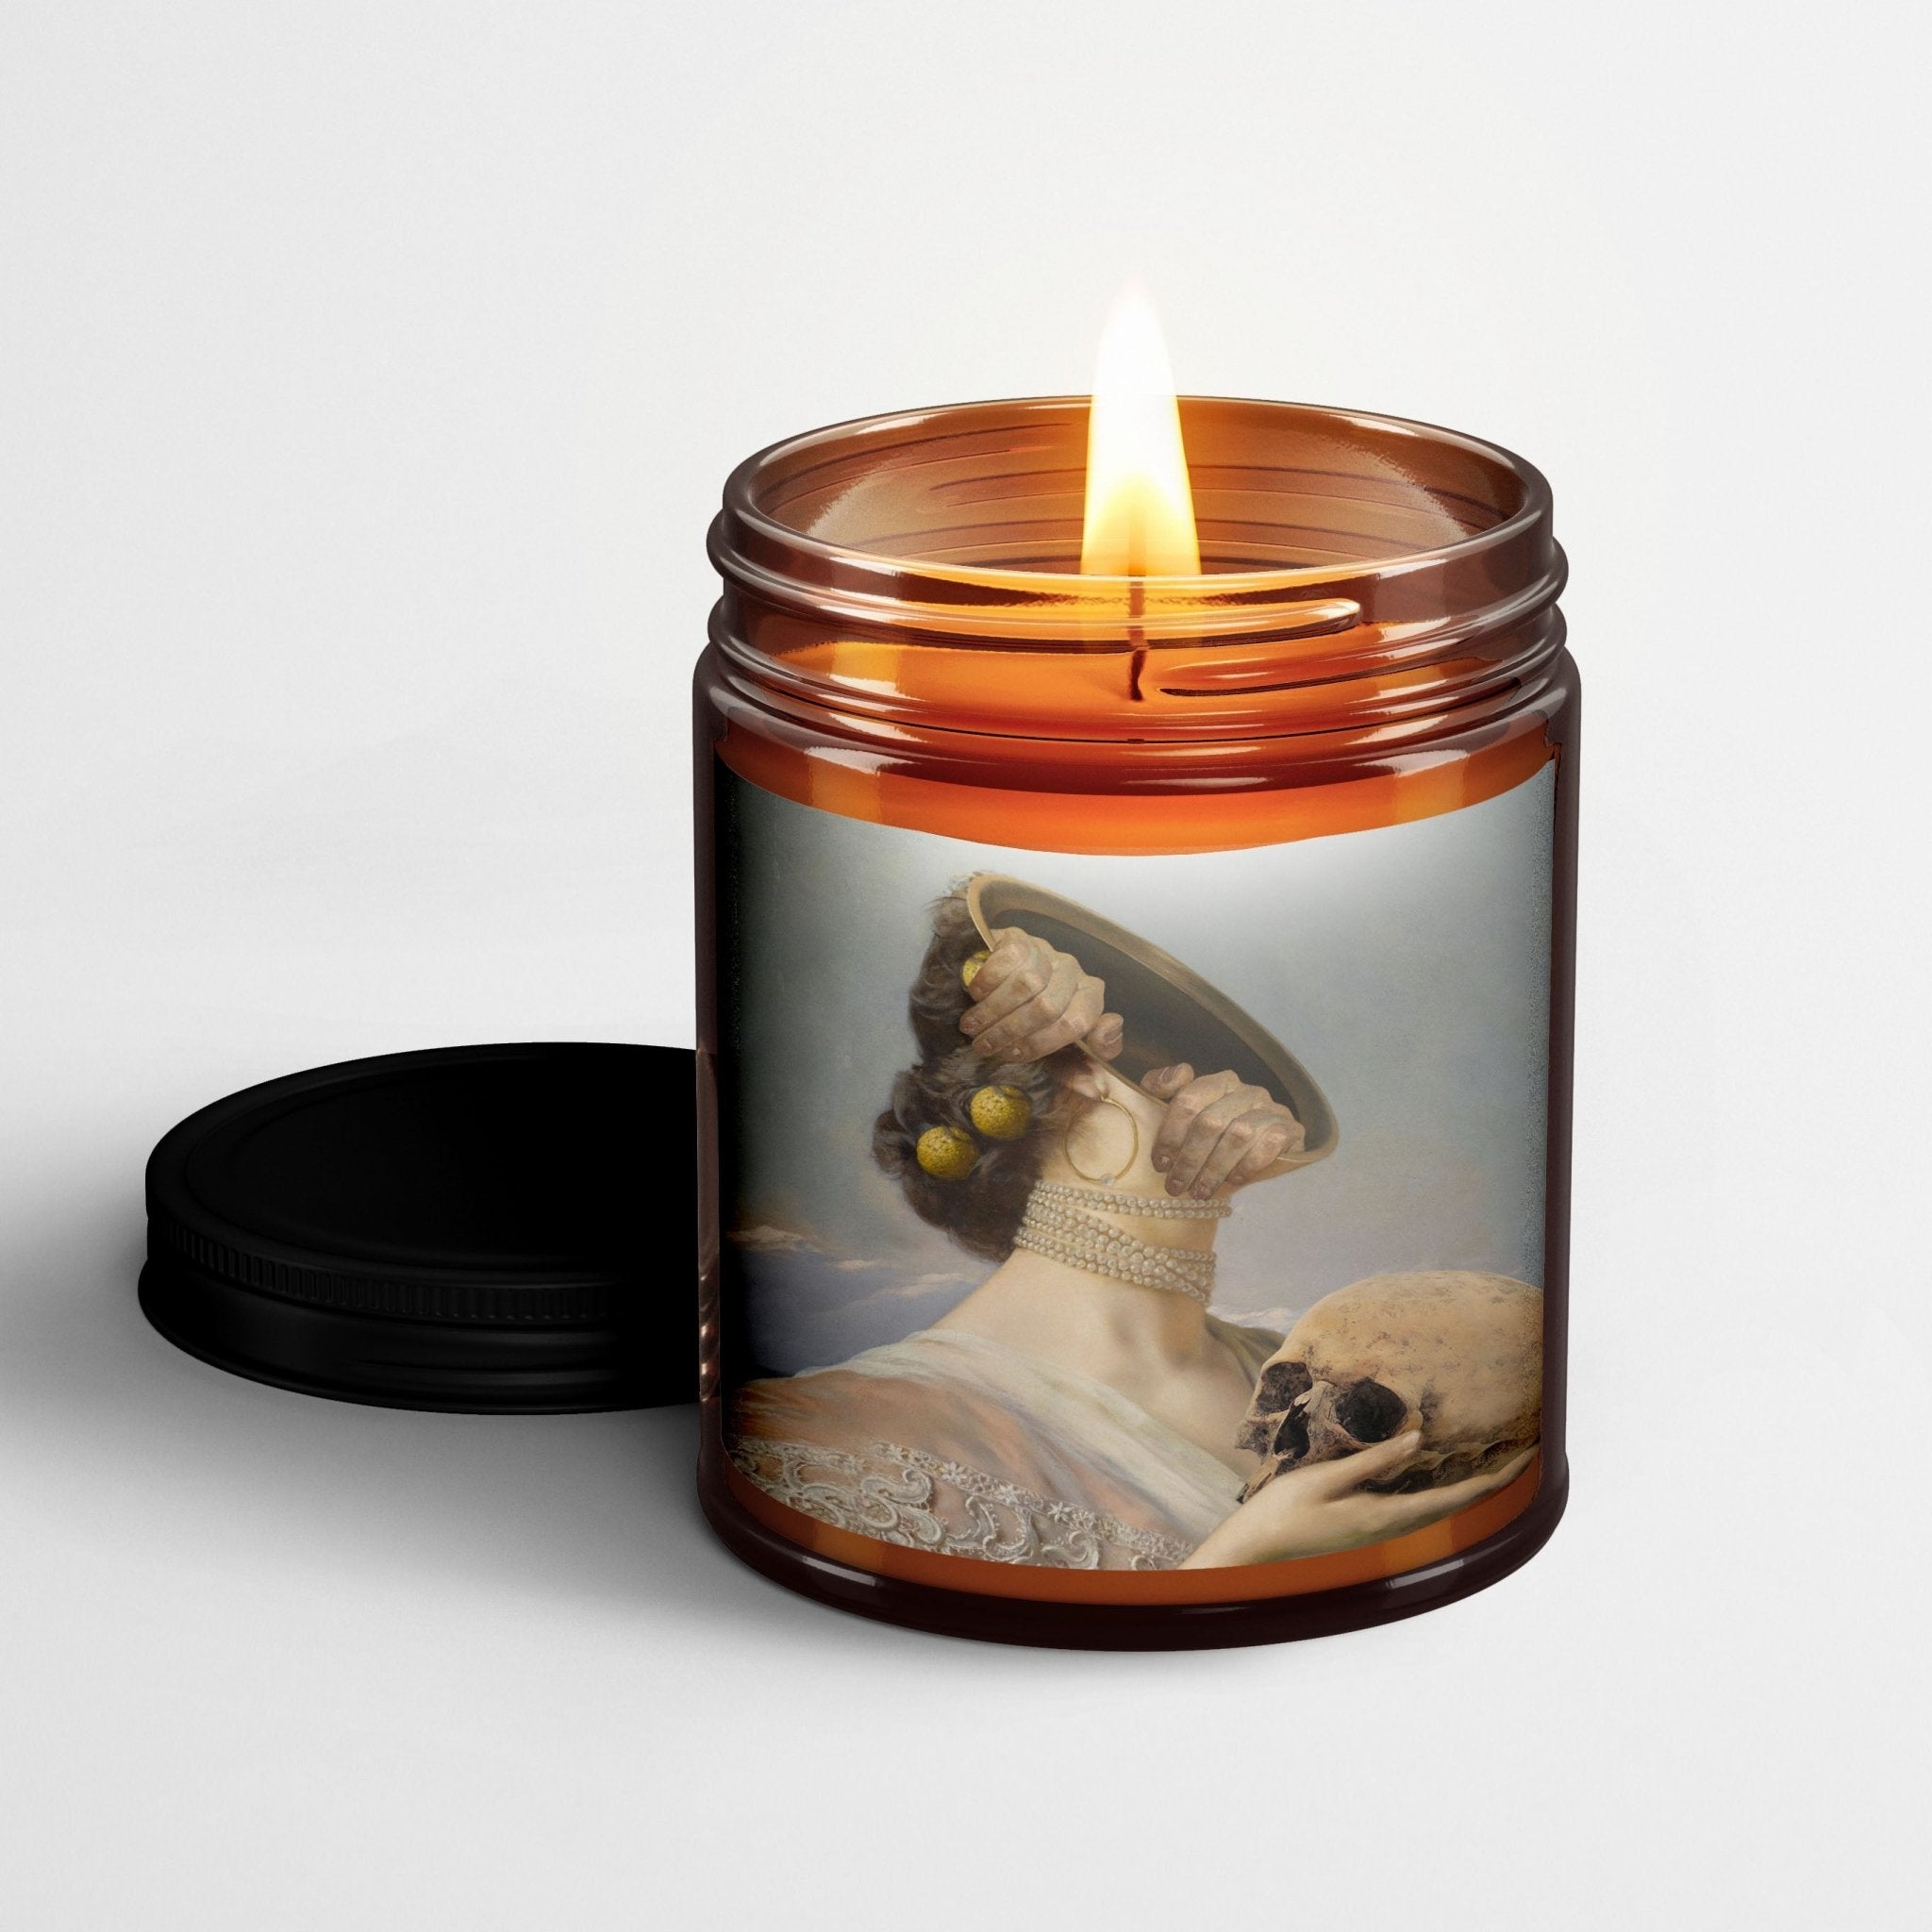 Welder Wings Scented Candle in Amber Glass Jar: Philosophy in Critical Days - Candlefy